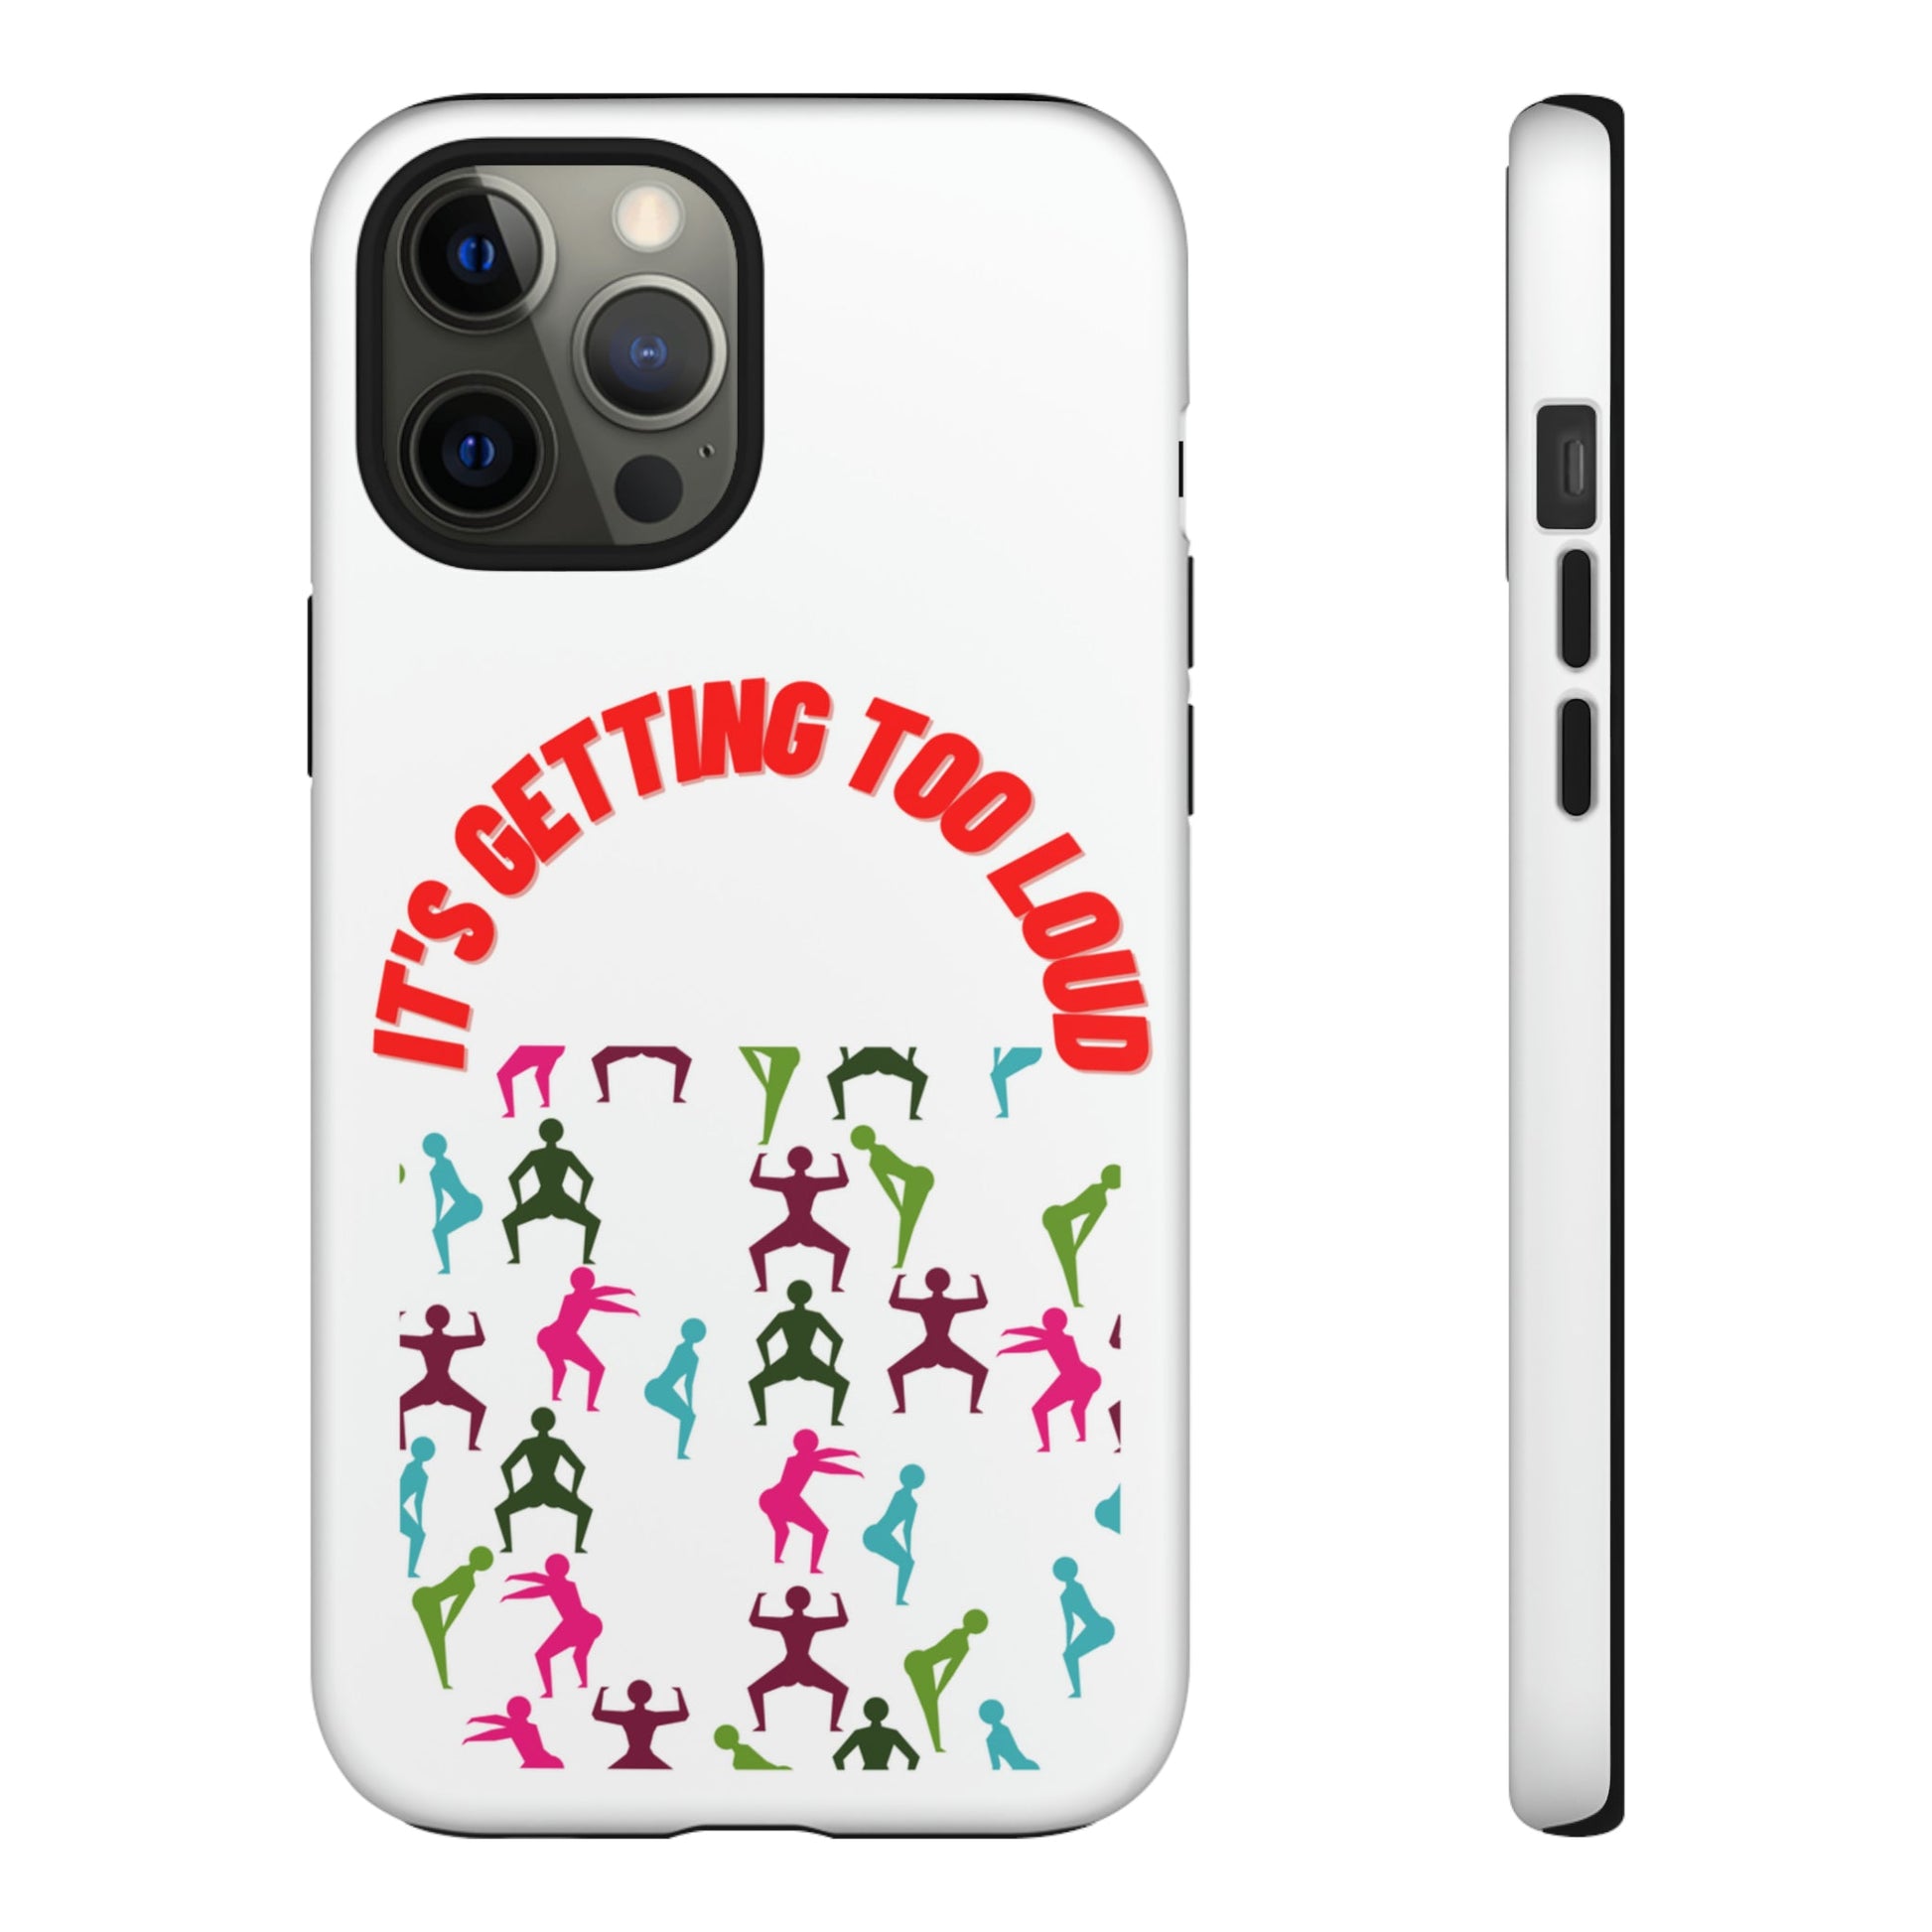 Phone Case - It's Getting Too Loud Tough Cases For IPhone And Samsung